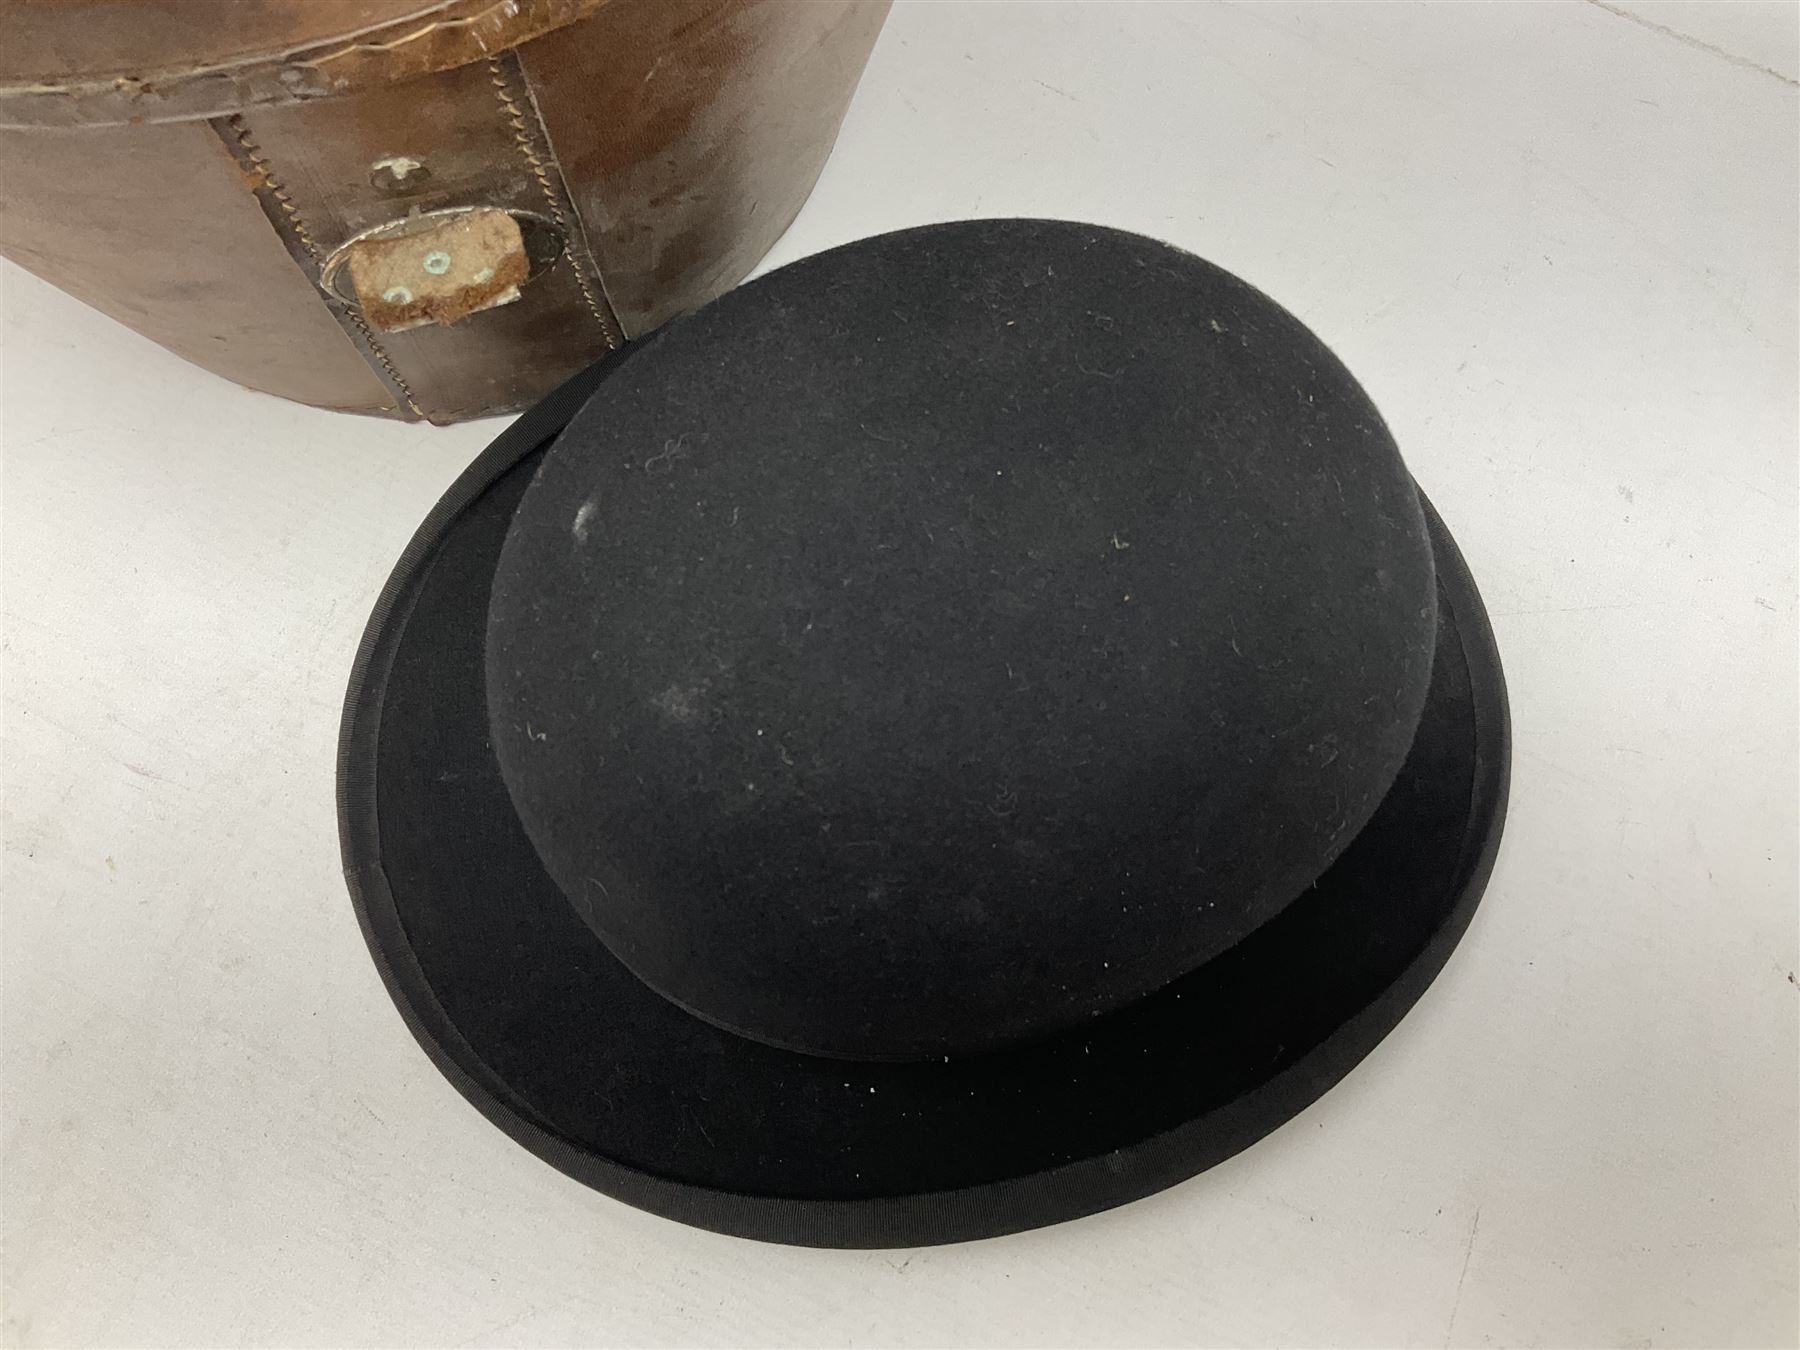 Bowler hat in leather hat box W36cm - Image 2 of 8